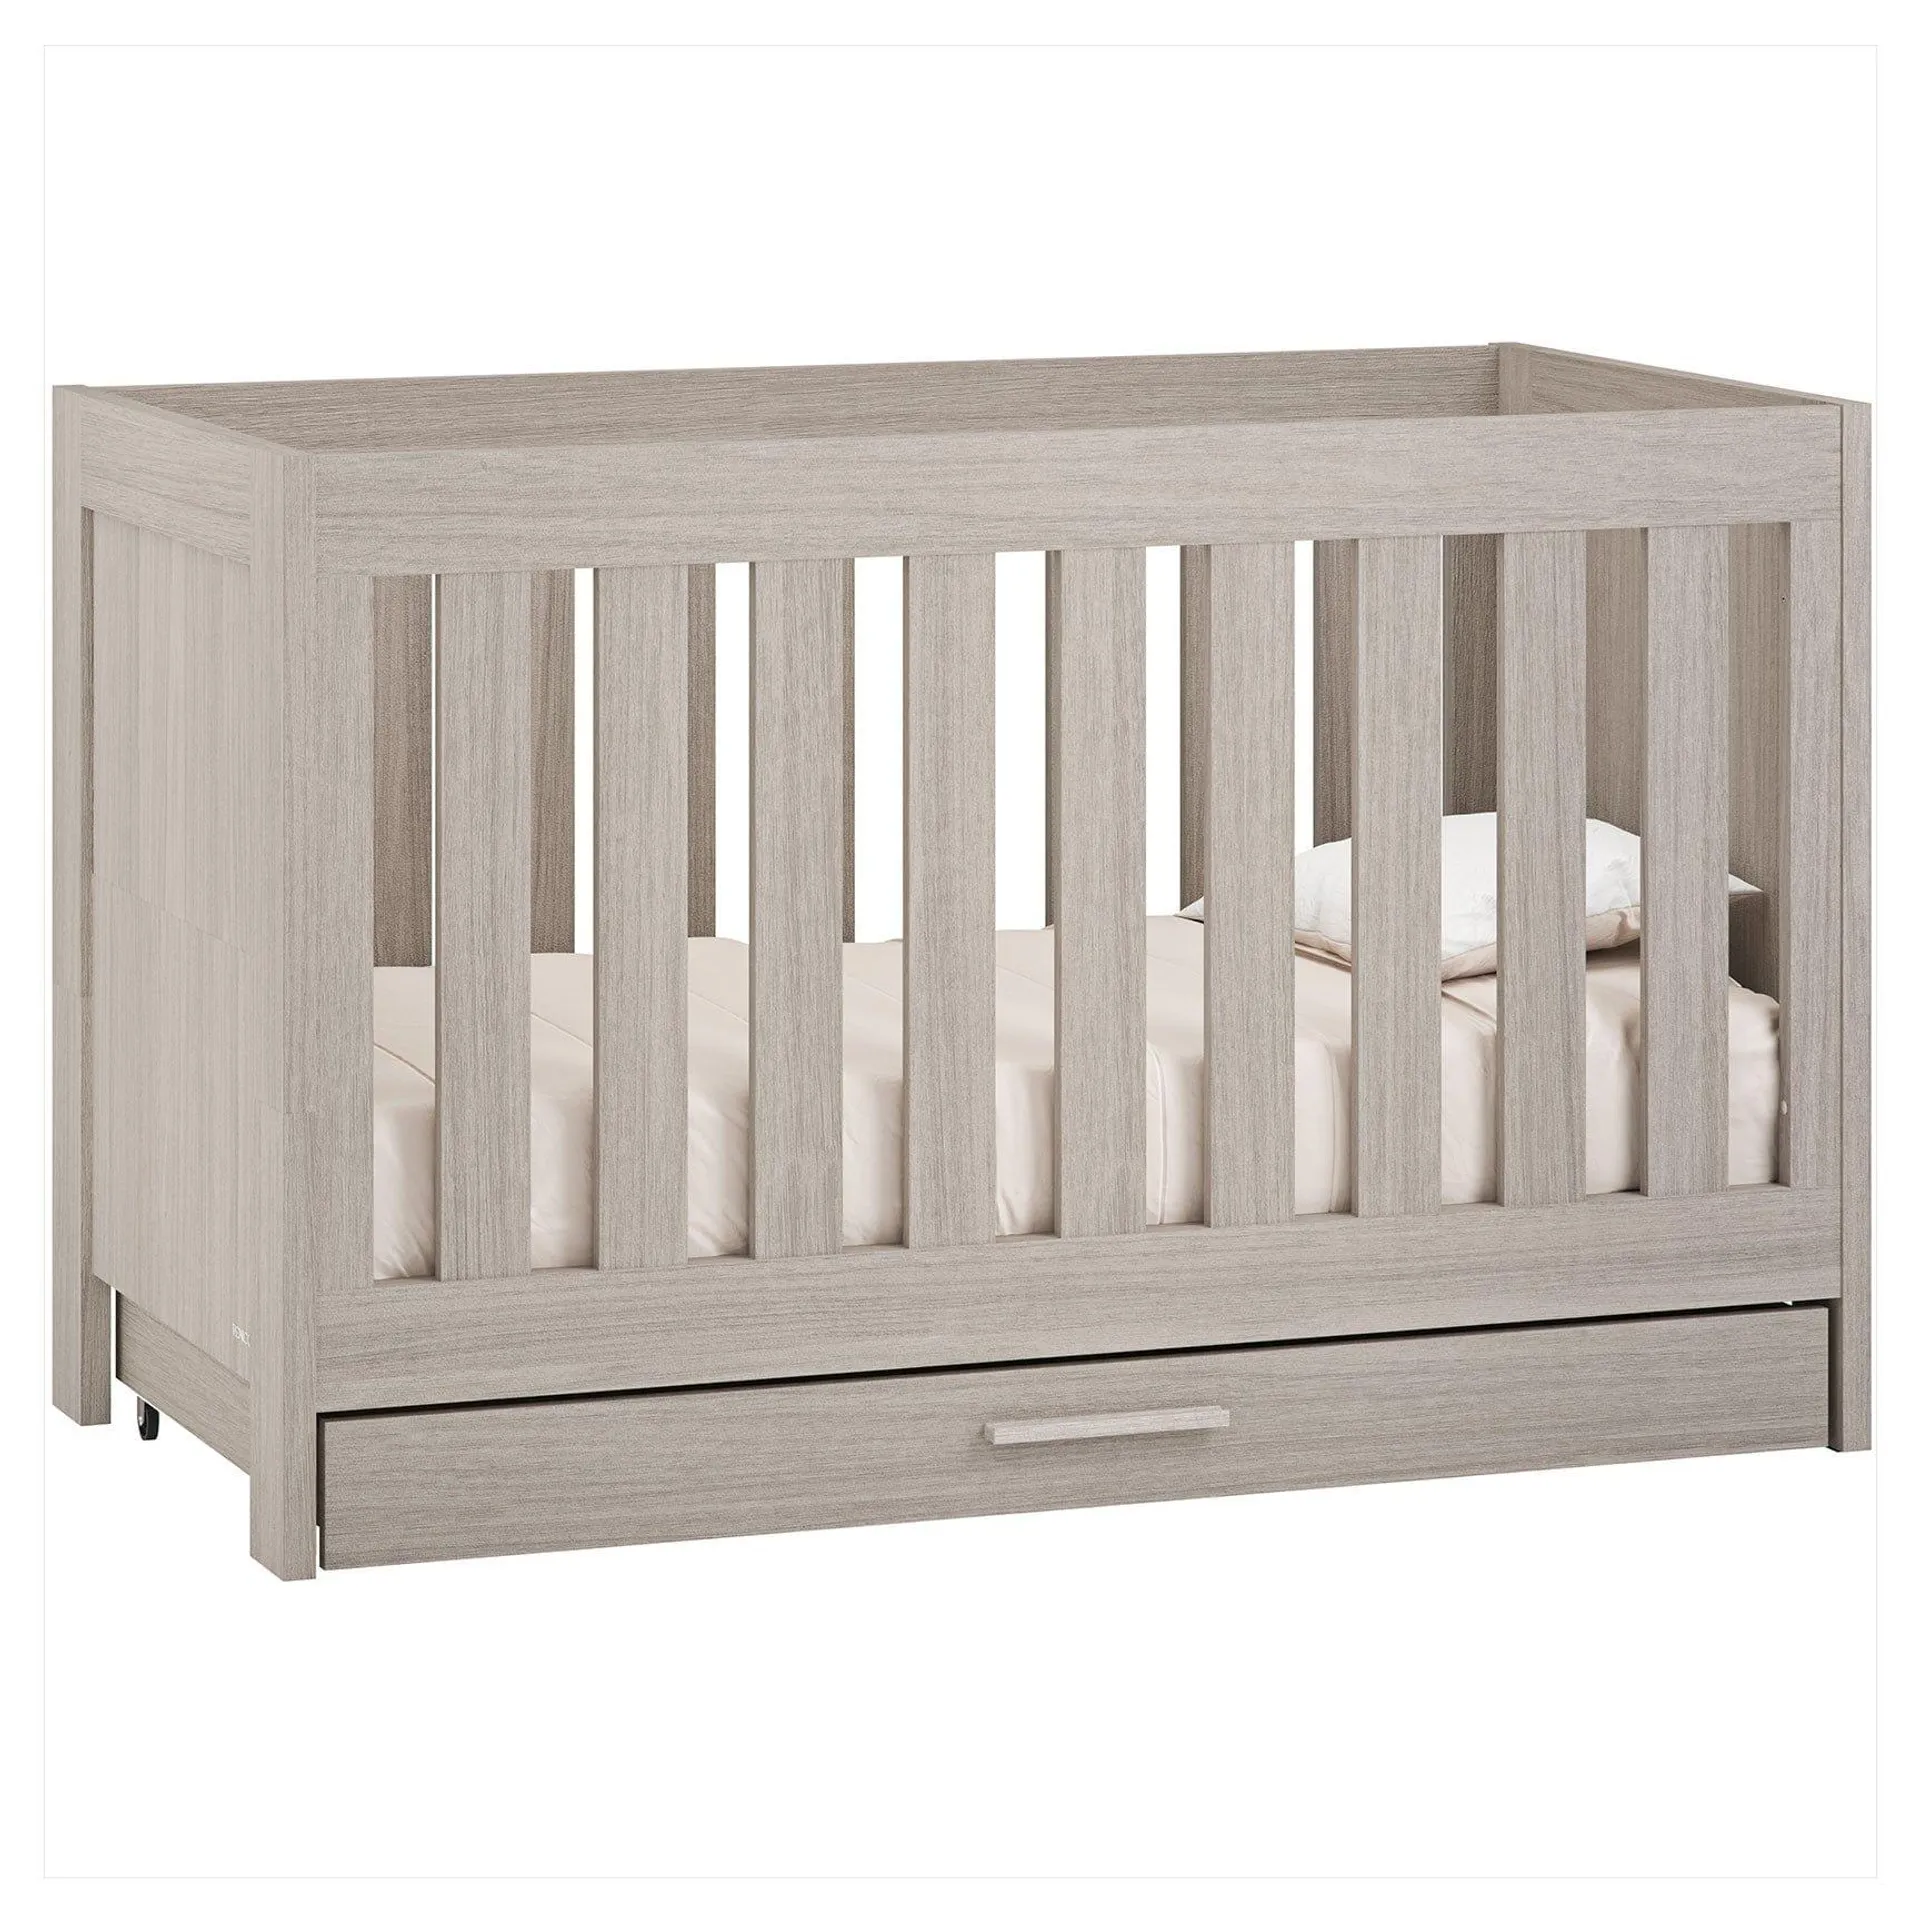 Venicci Forenzo Cot Bed with Drawer in Nordic White